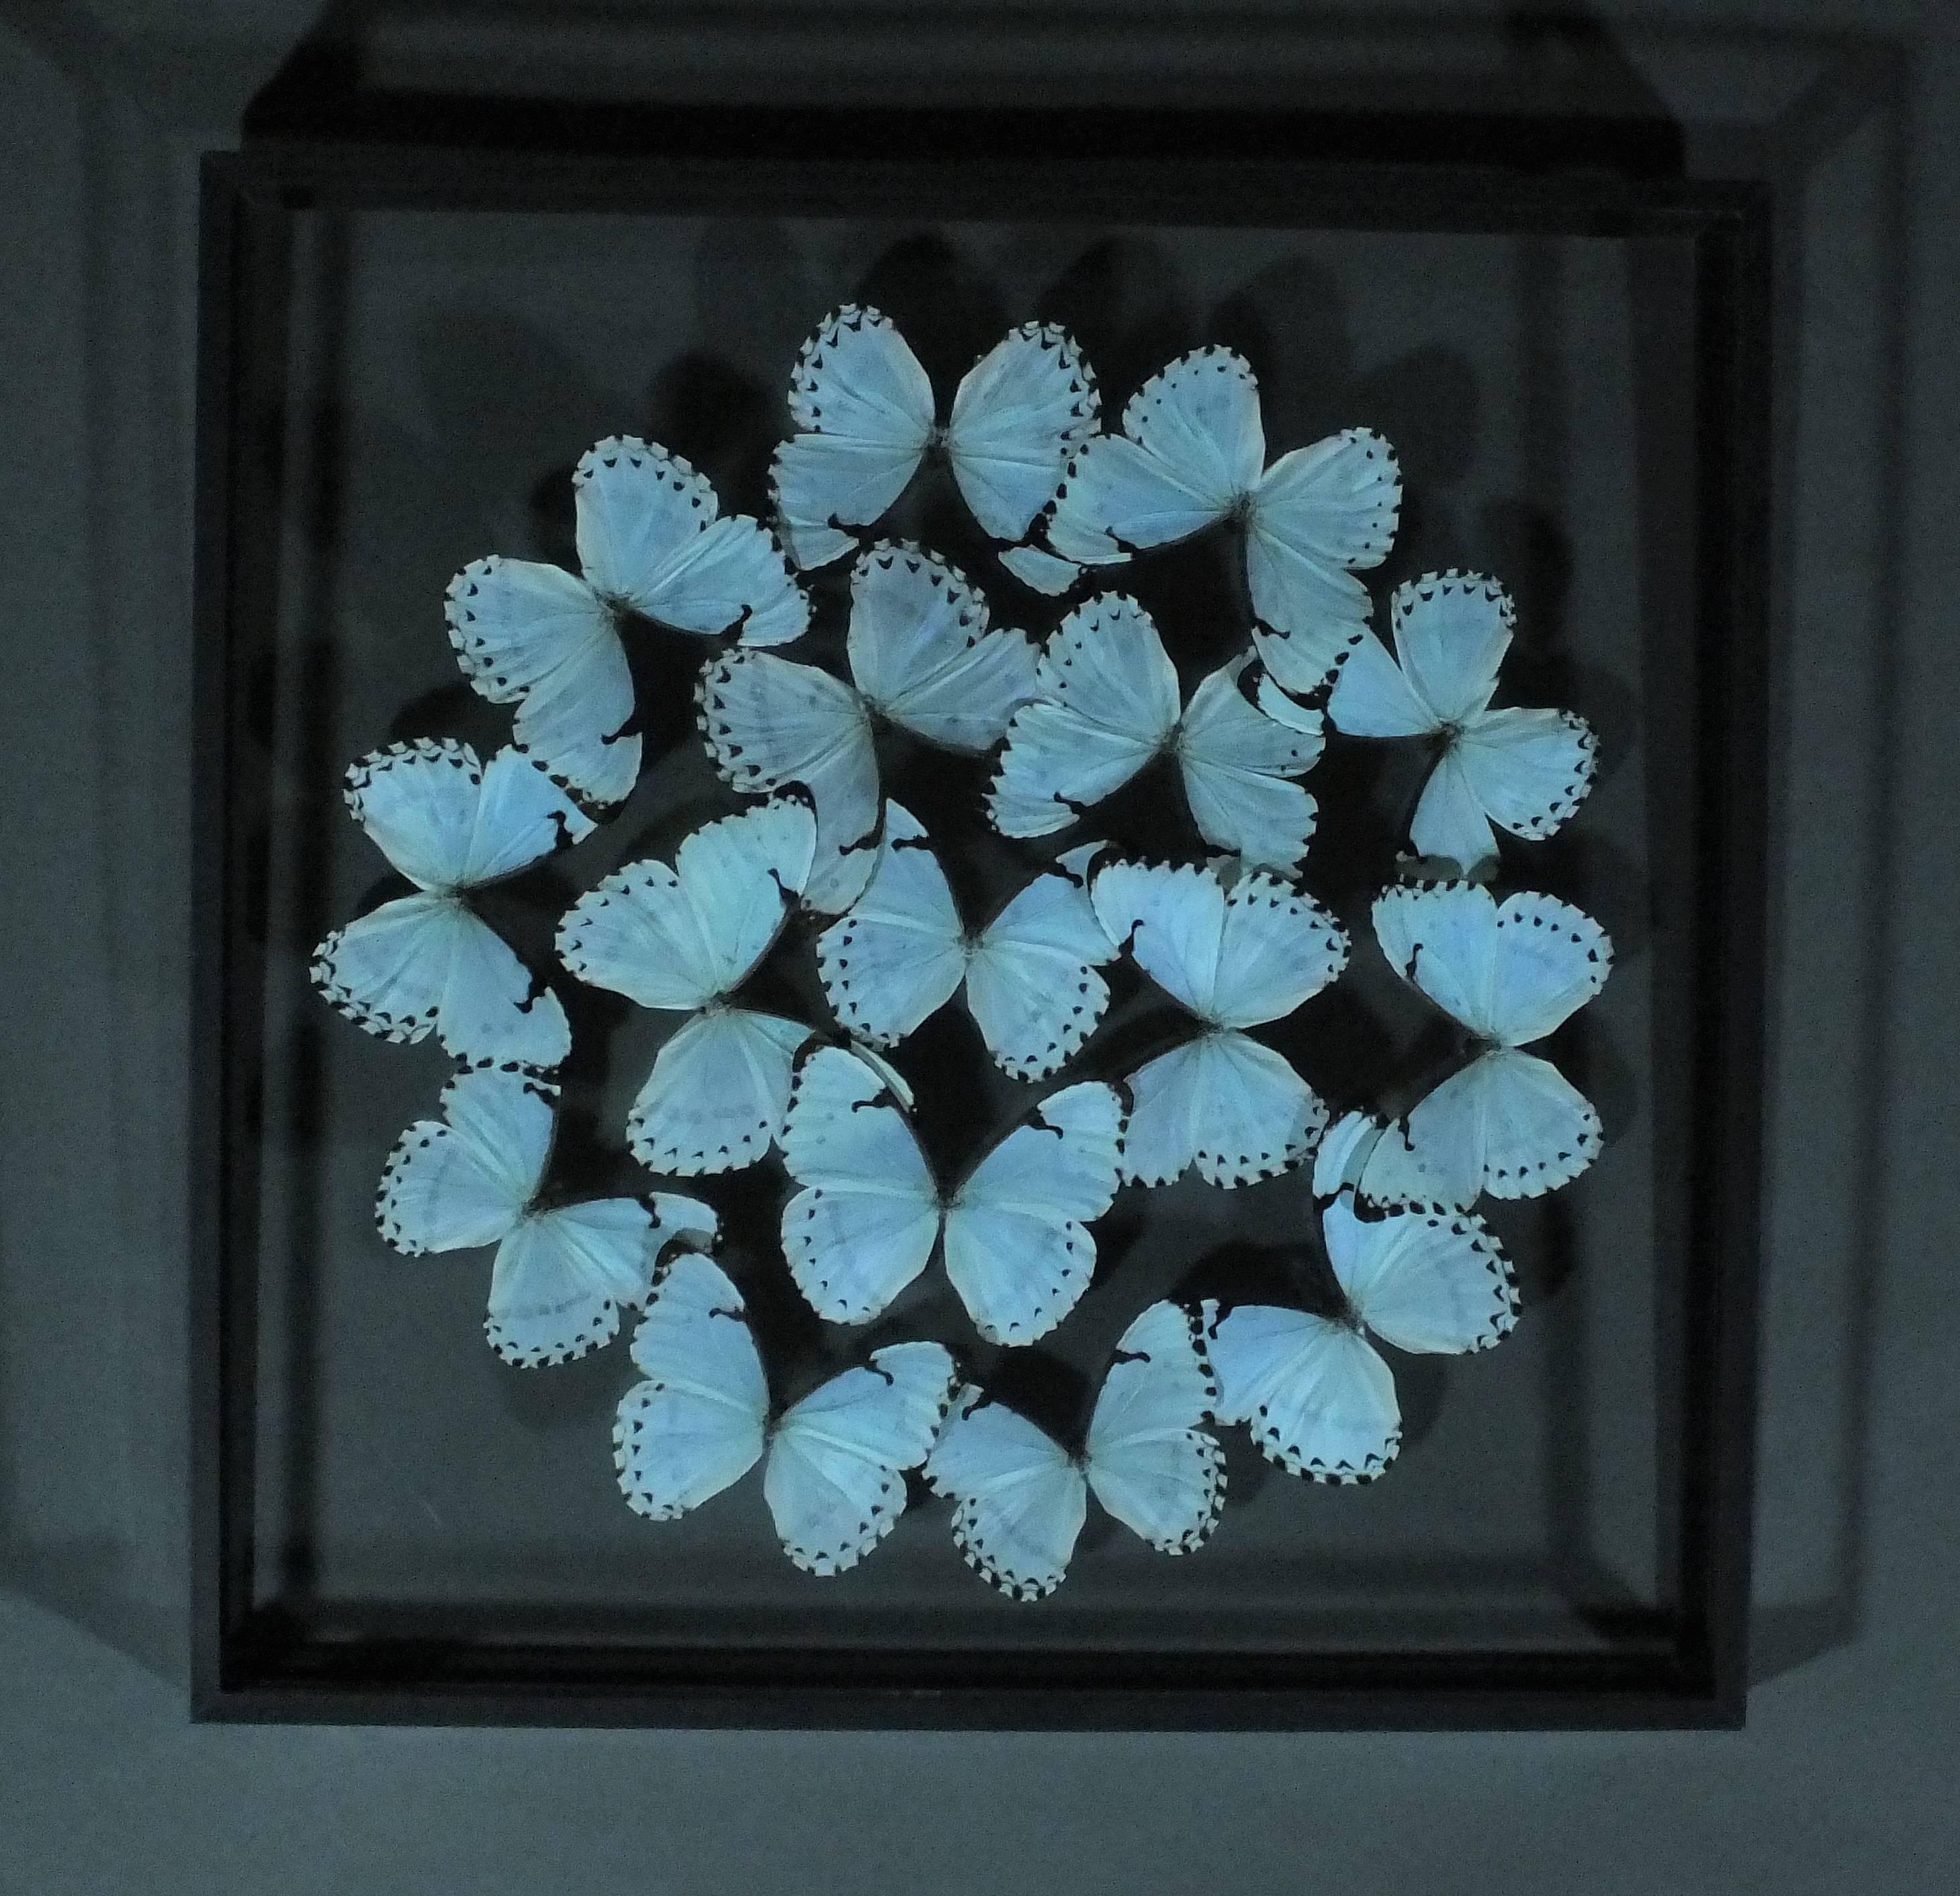 Dried Morpho catenarius butterflies in a double glass frame. Signed Violo on the top right.